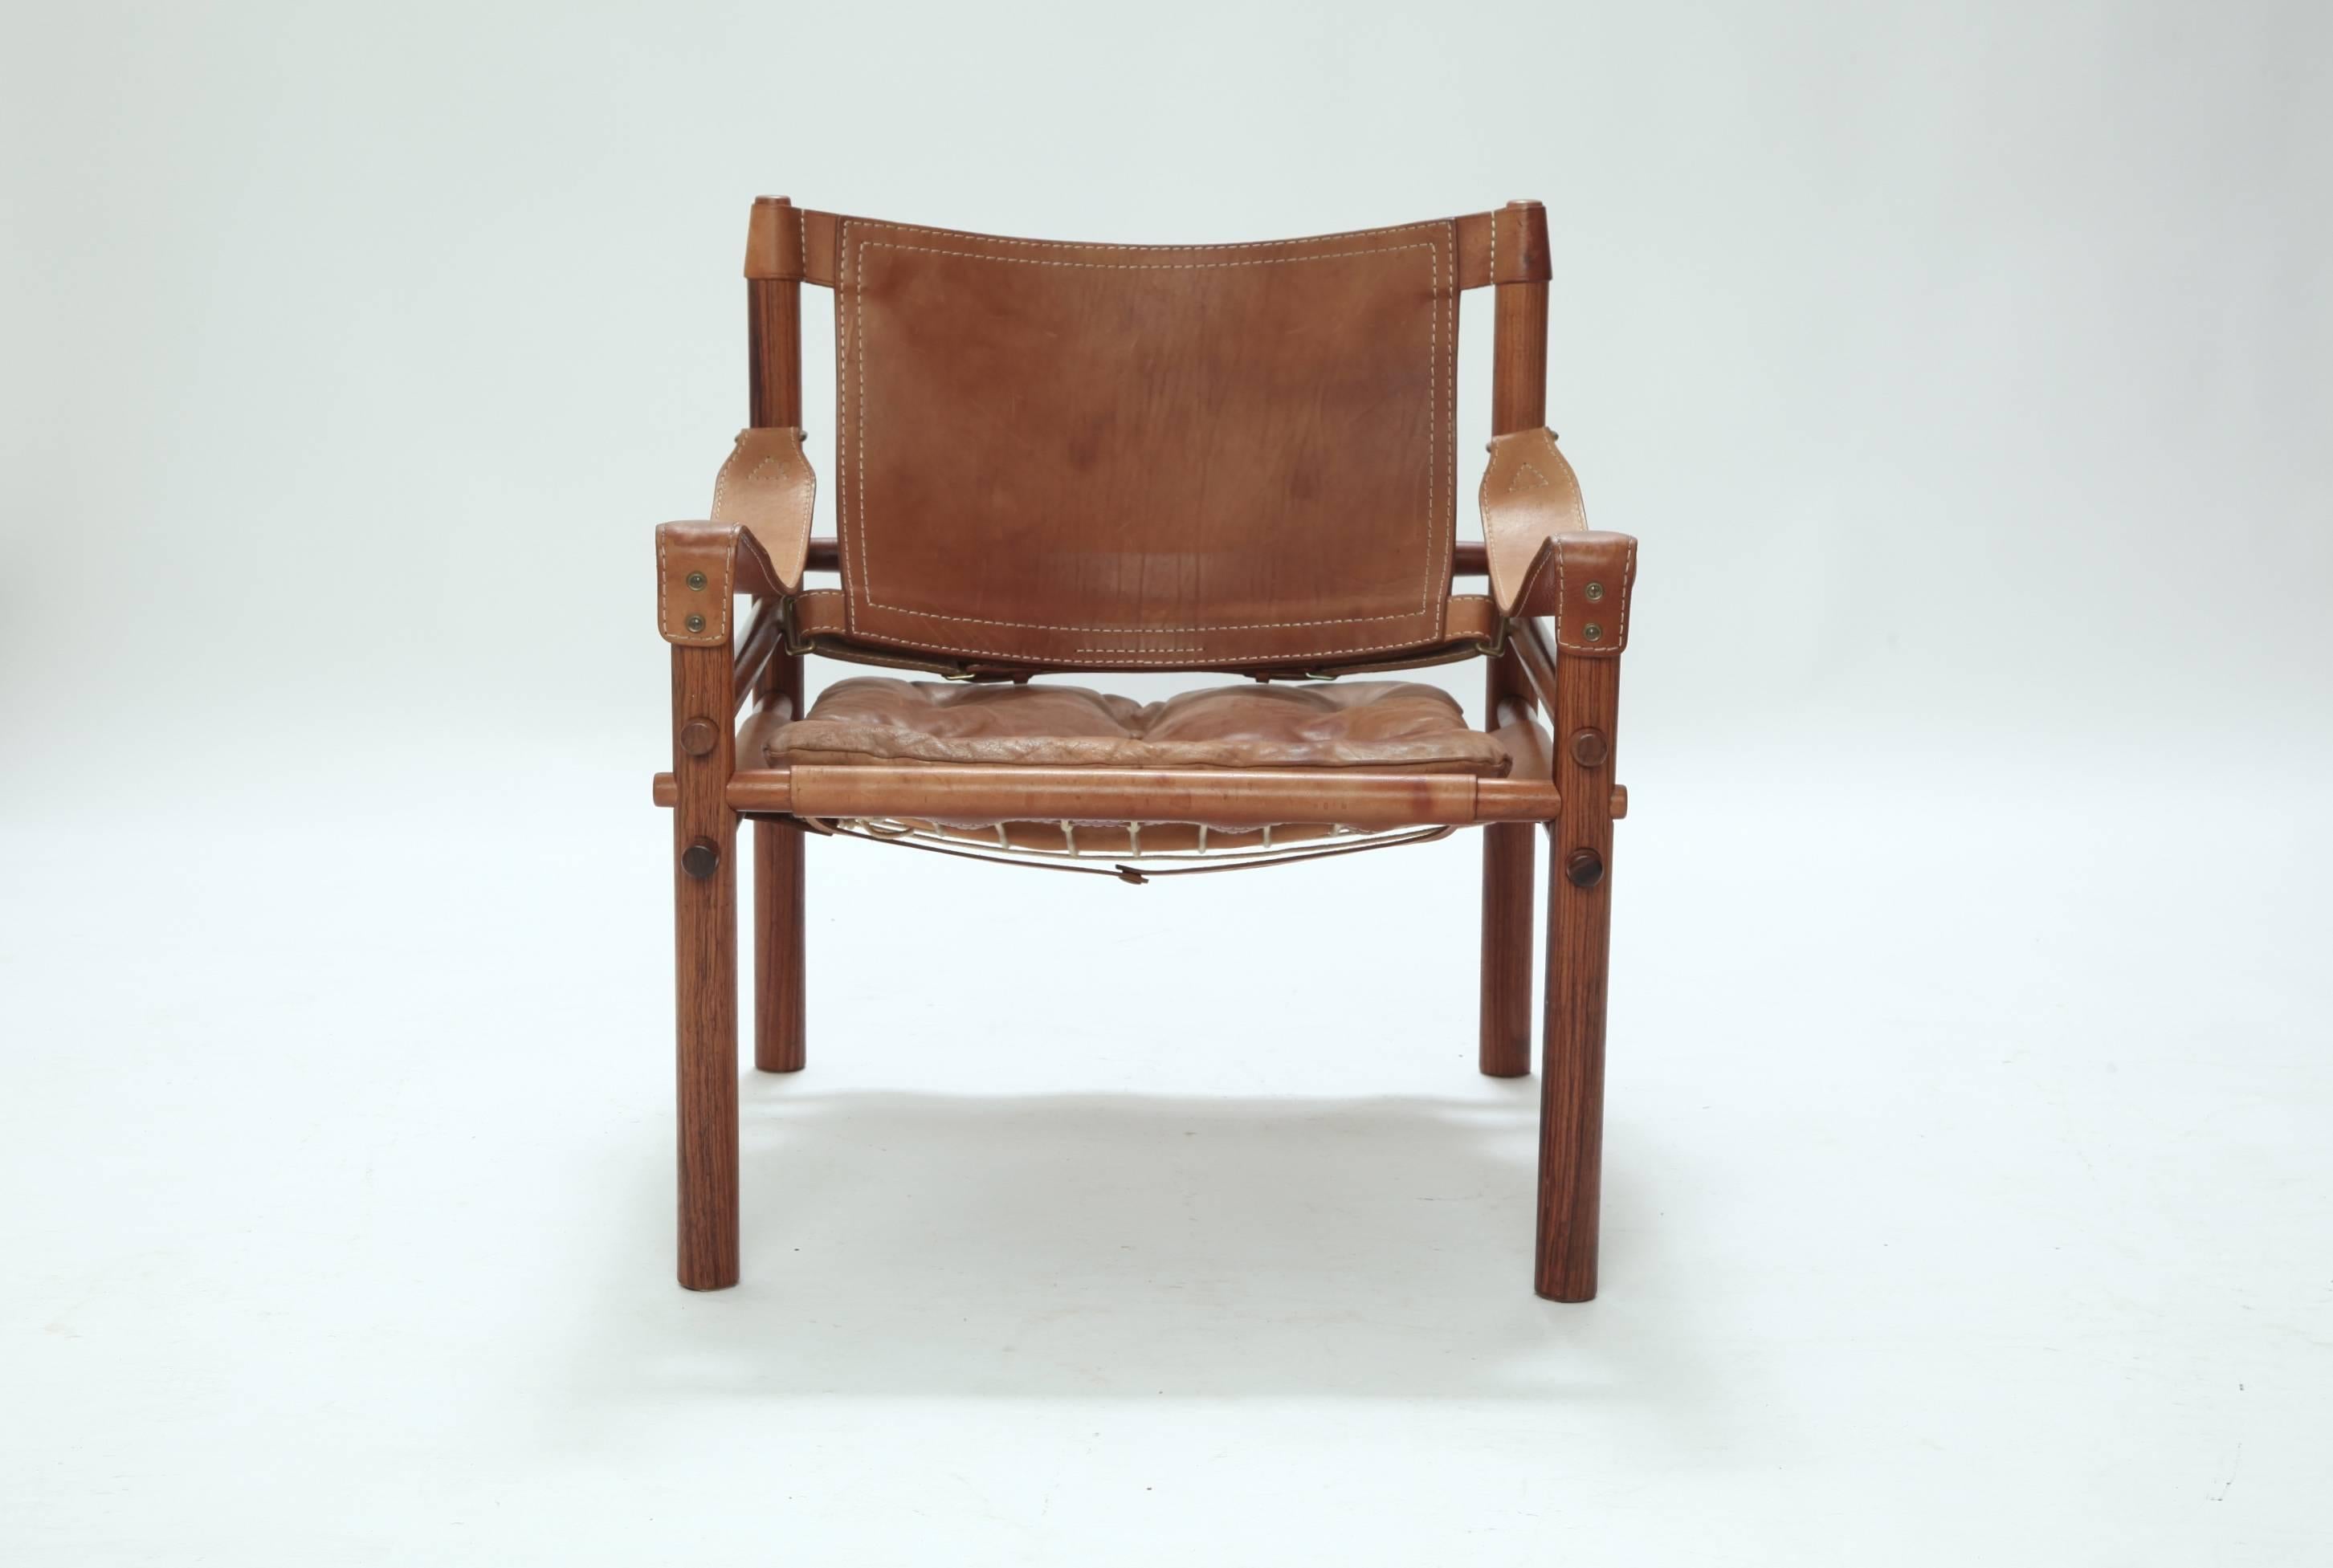 Swedish Arne Norell Rosewood Safair Sirocco Chair, Sweden, 1960s